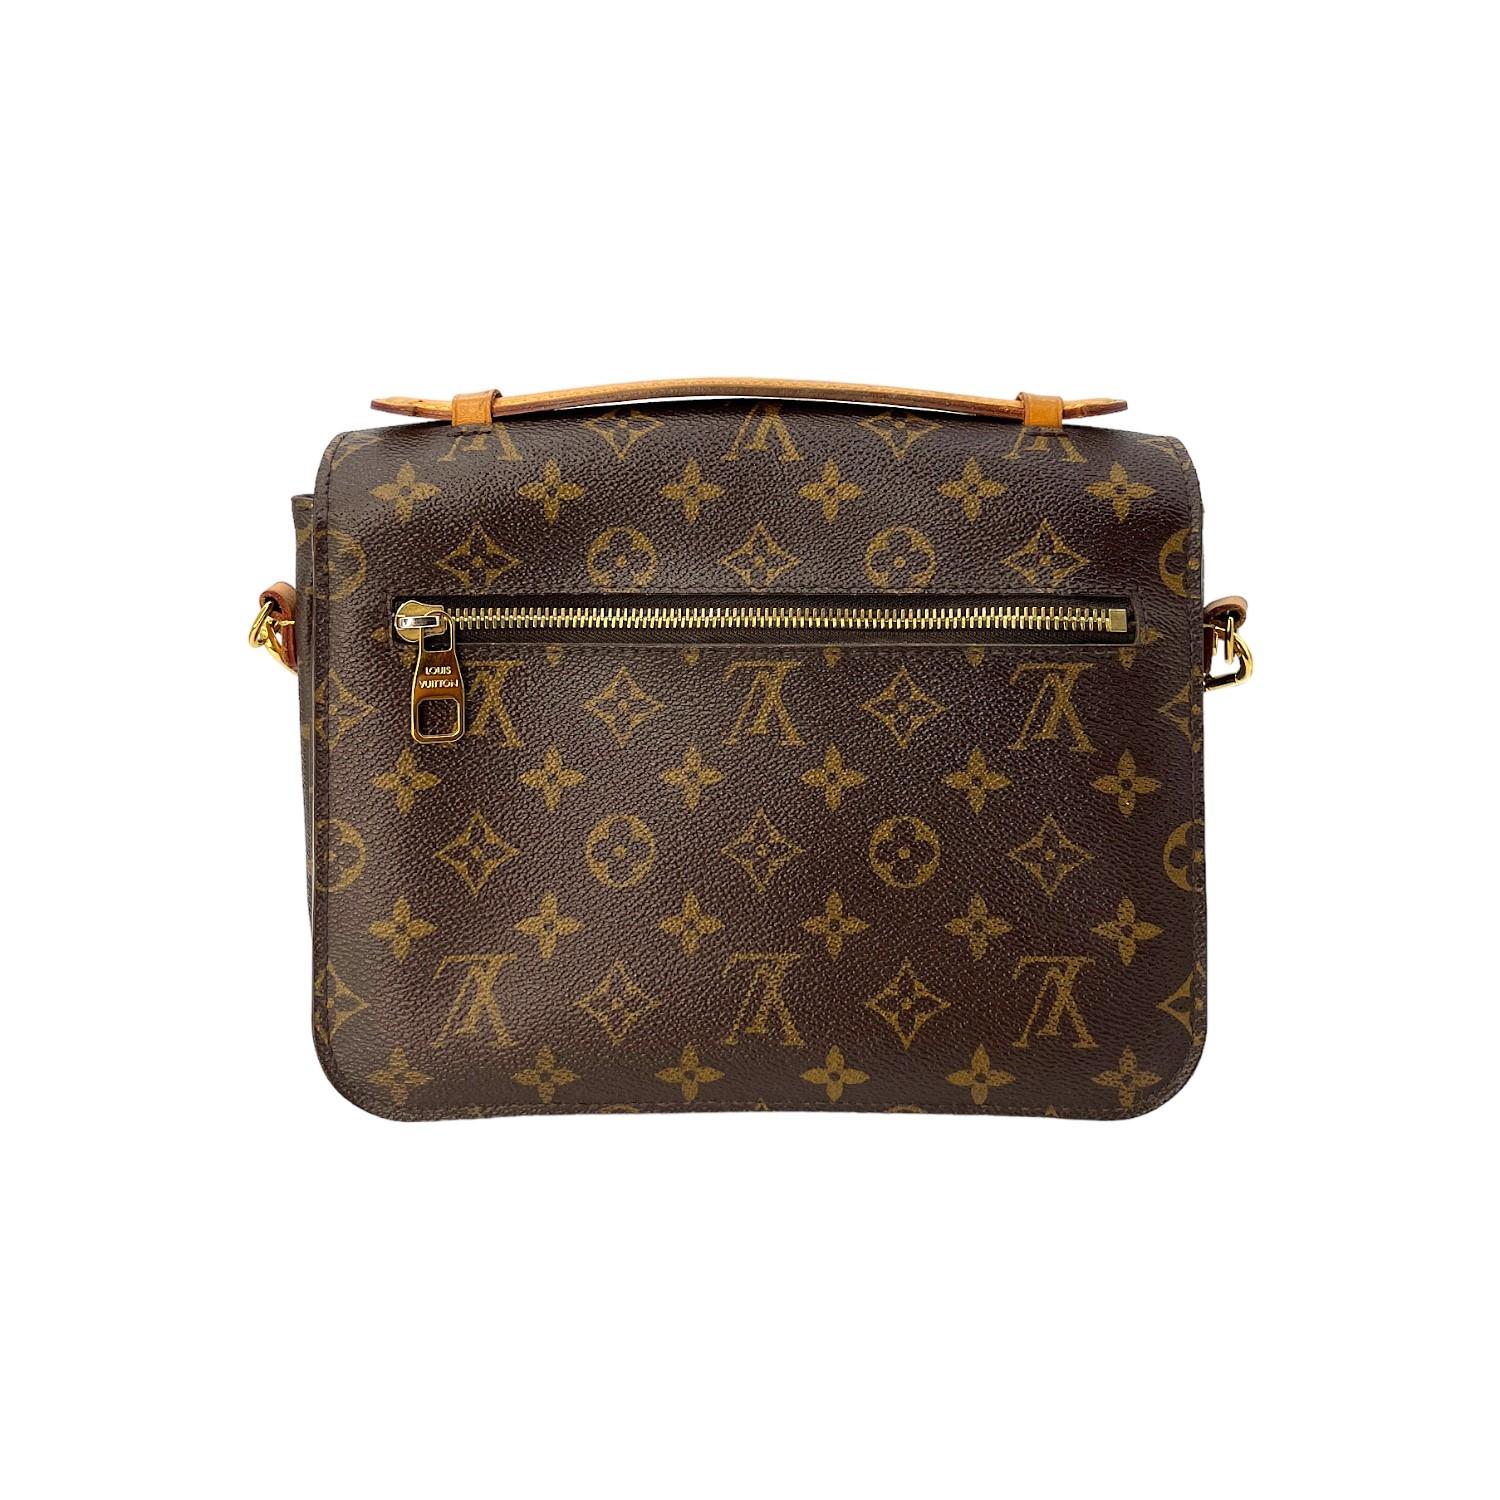 This Louis Vuitton Monogram Pochette Métis was made in France in 2017 and it is finely crafted of the iconic Louis Vuitton Monogram coated canvas exterior with leather trimming and gold-tone hardware features. It has a flat leather top handle. It